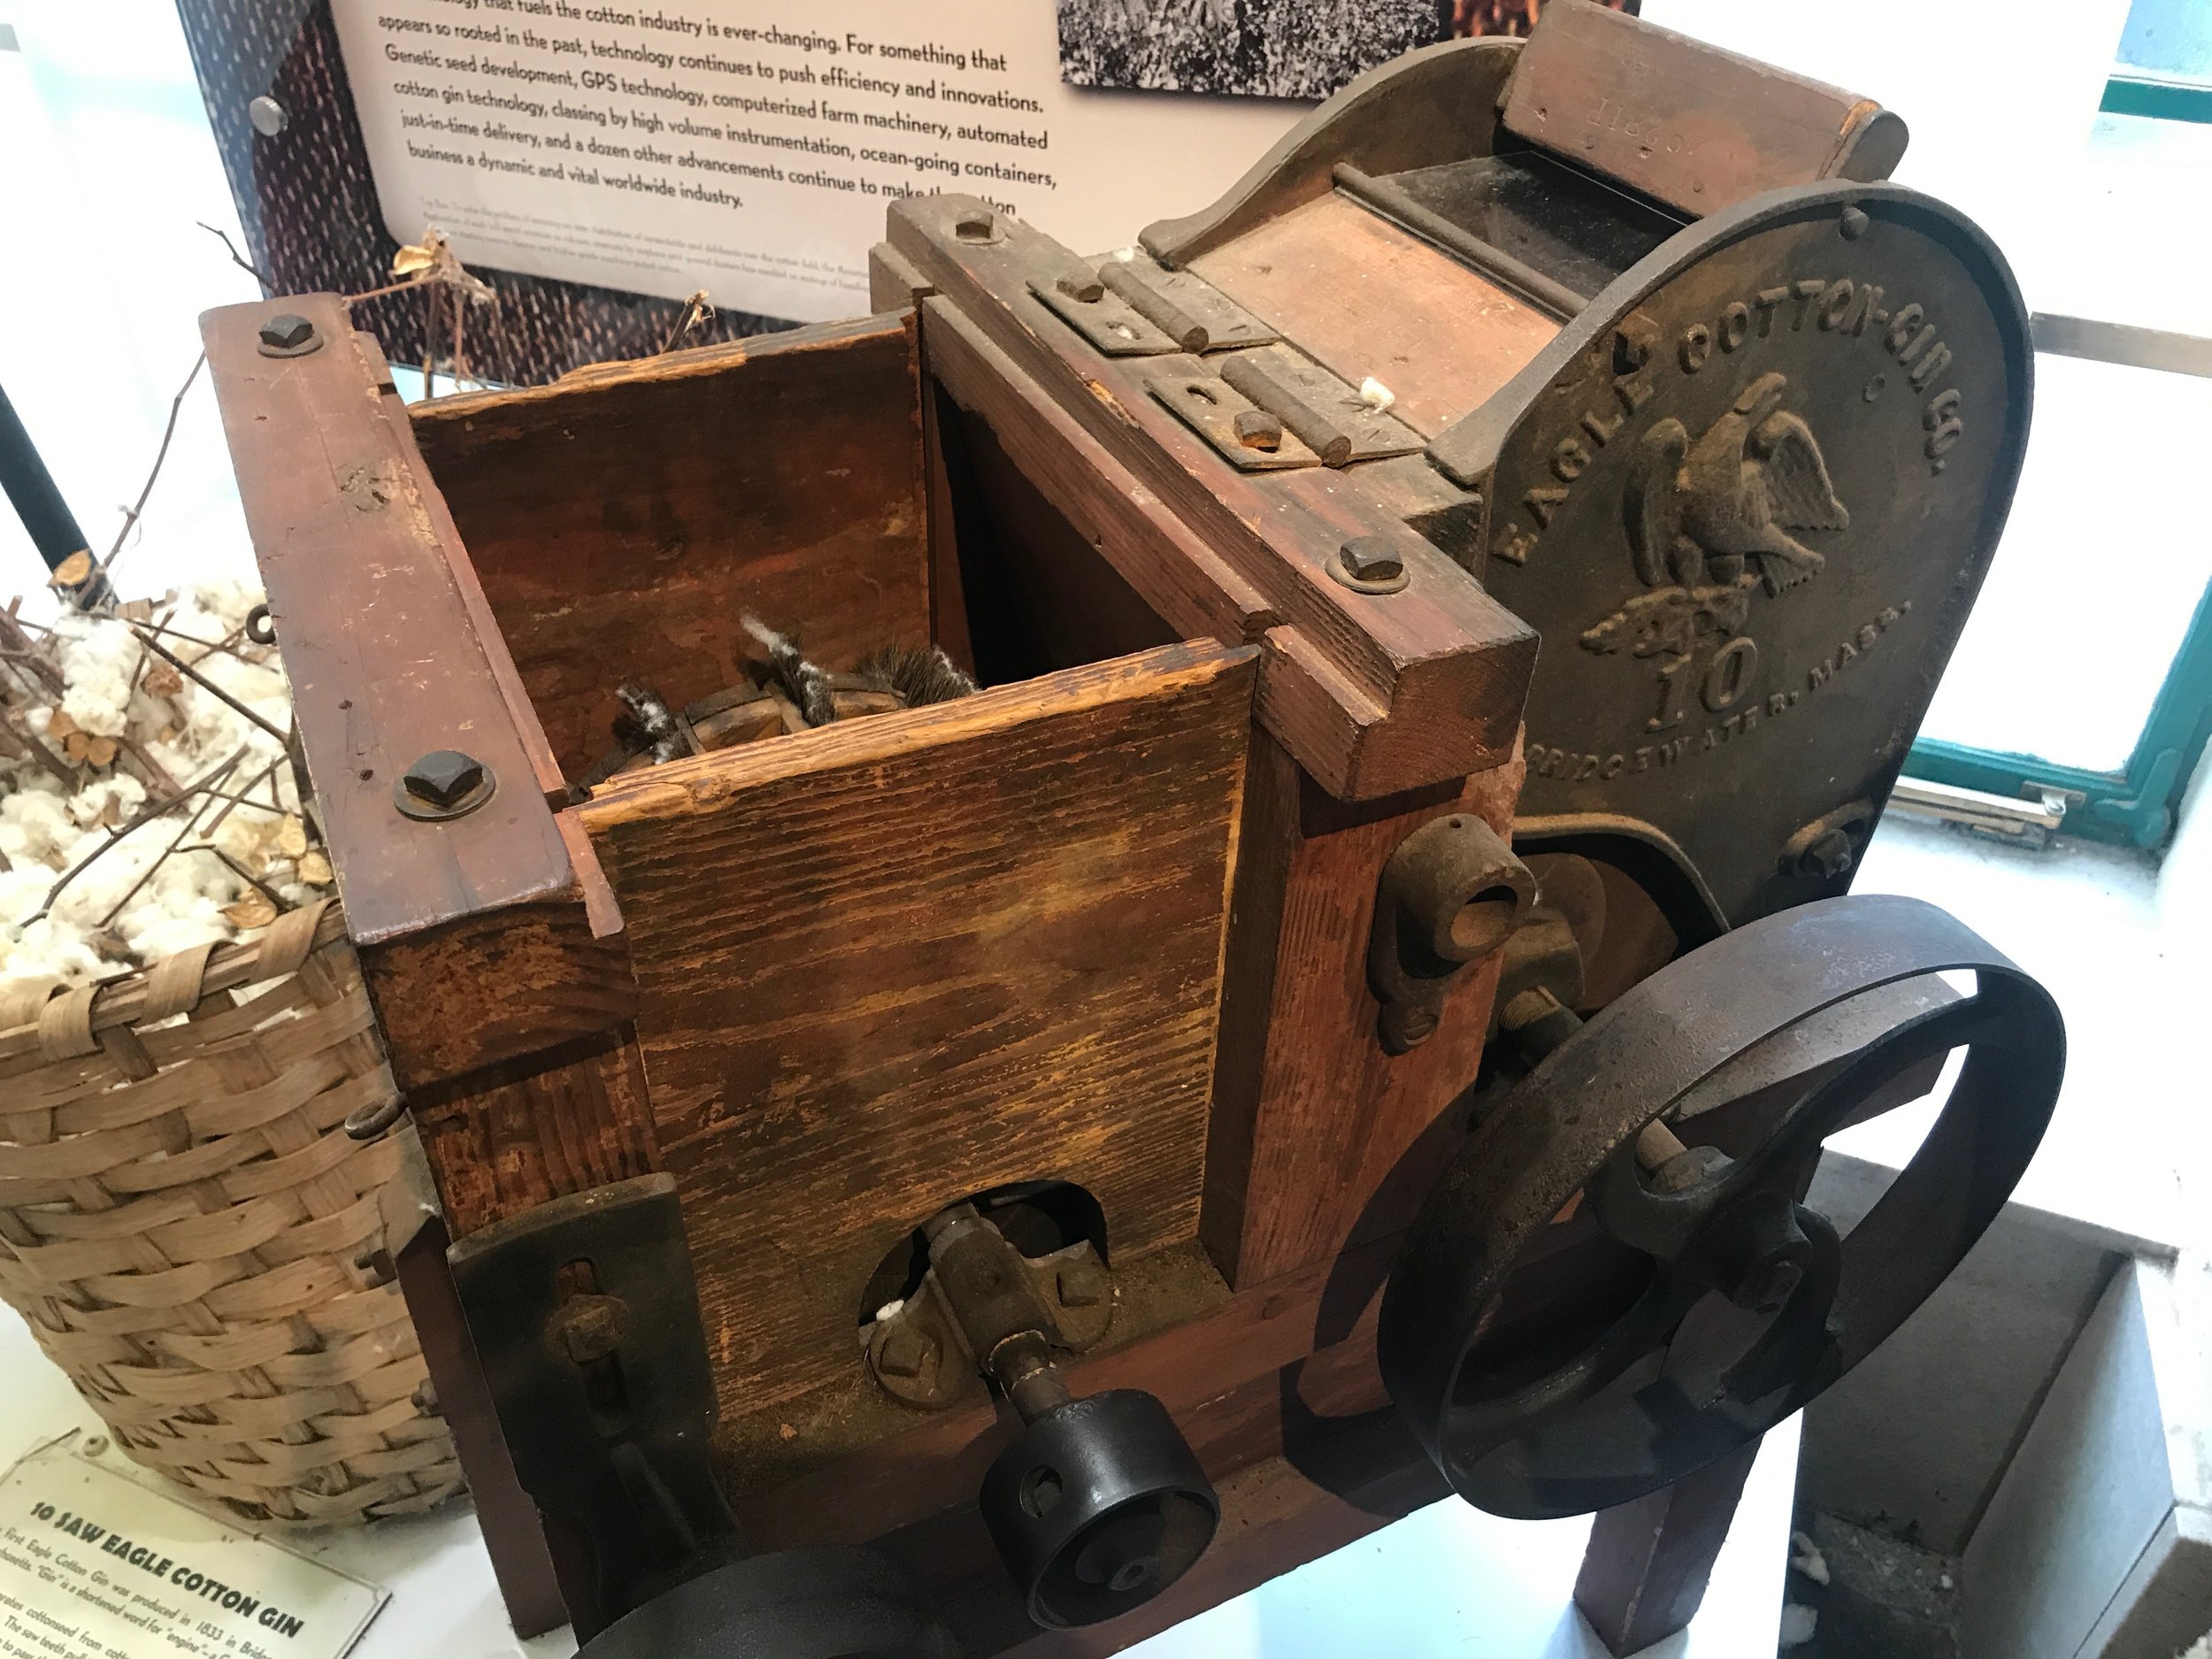  A cotton gin, manufactured in Massachusetts in 1833, on display at the Cotton Museum in Memphis.      